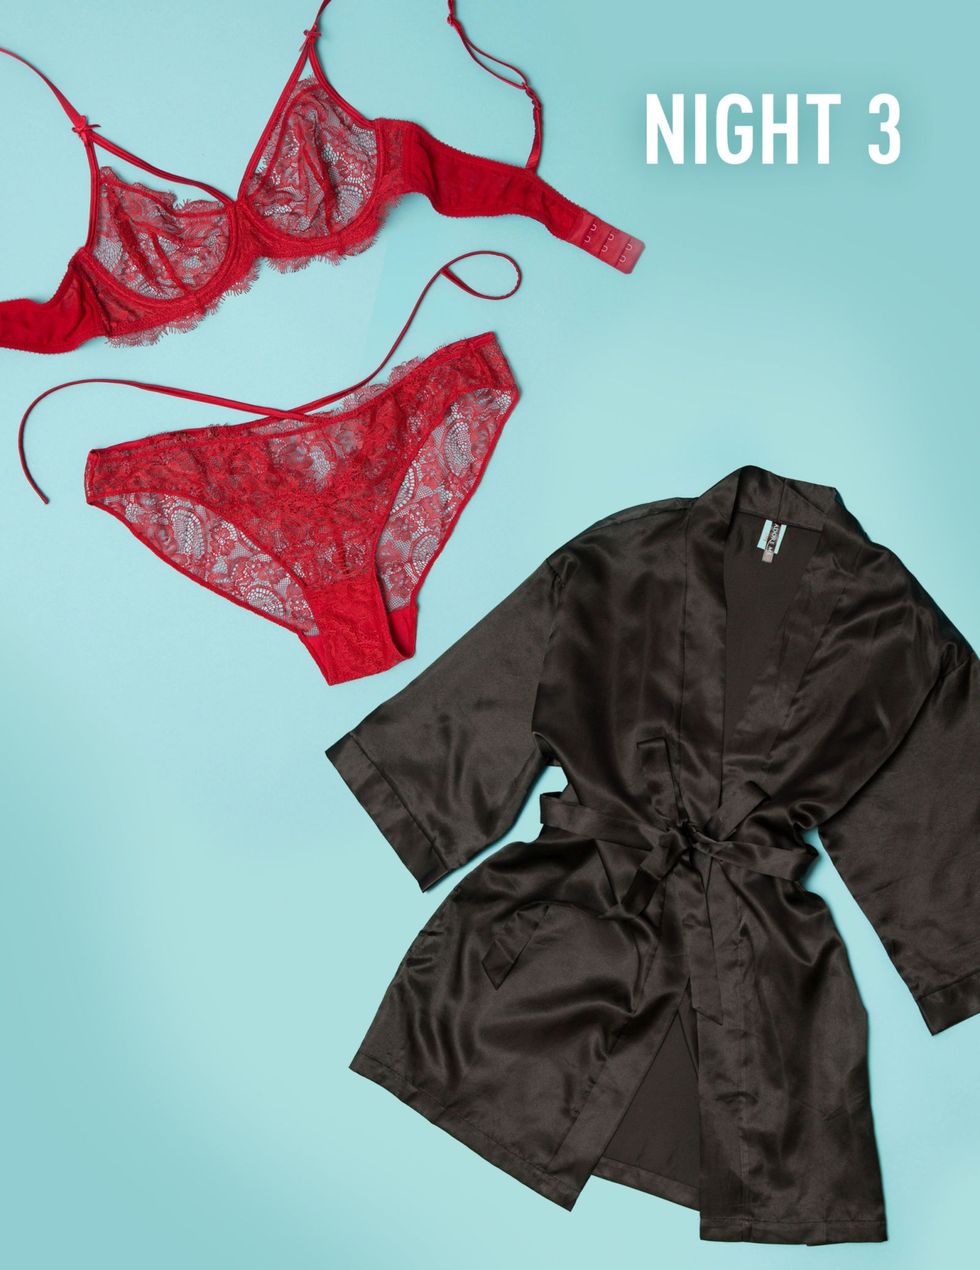 I wore lingerie to bed for seven nights - night three